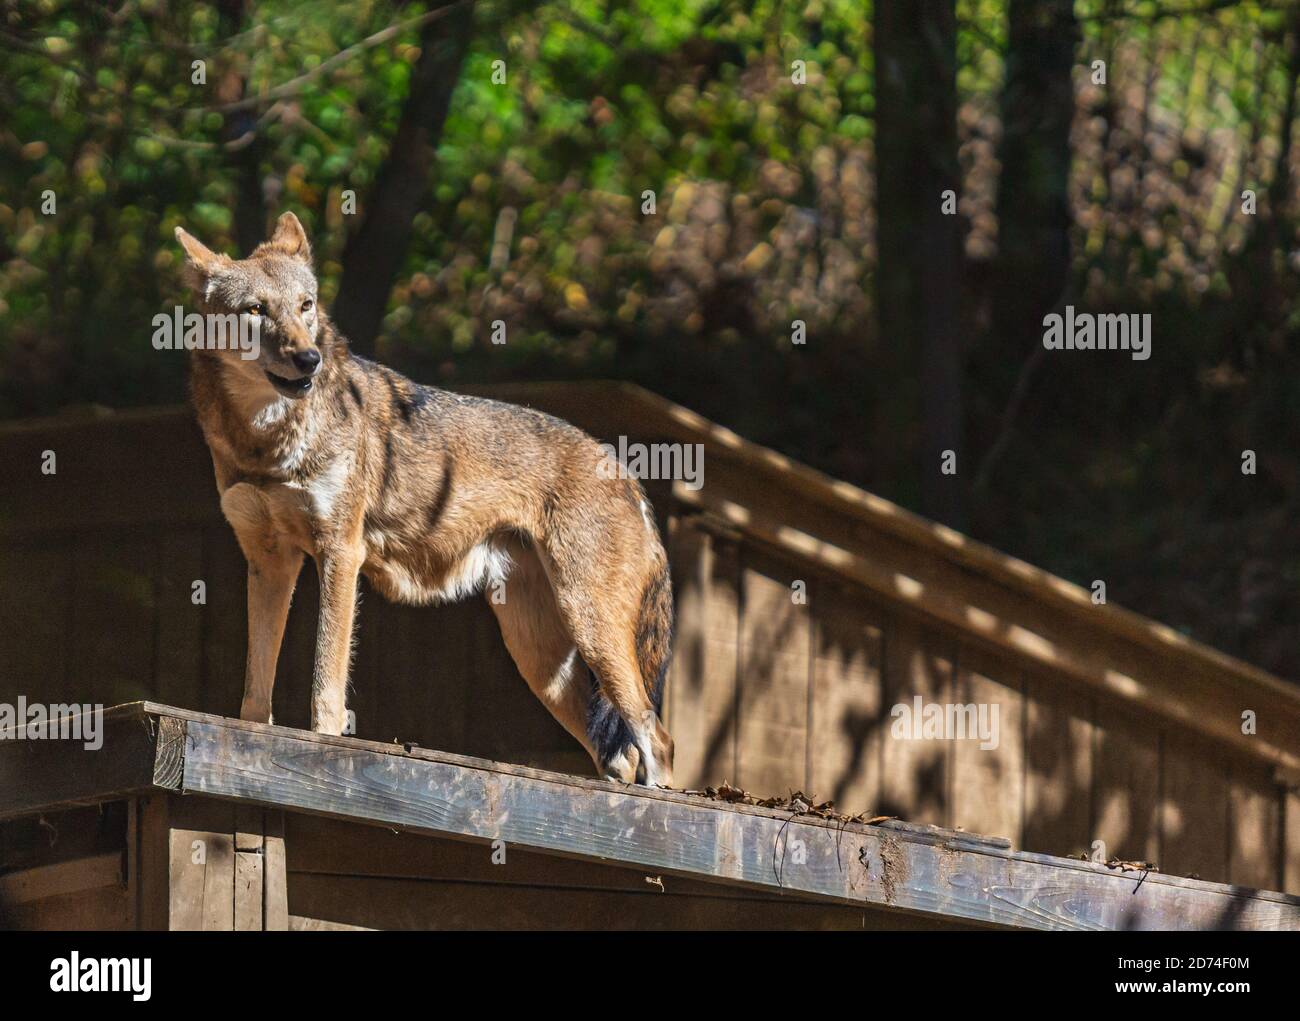 One of two red wolves, part of the Species Survival Plan program, stands on a roof at the WNC Nature Center in Asheville, NC, USA Stock Photo